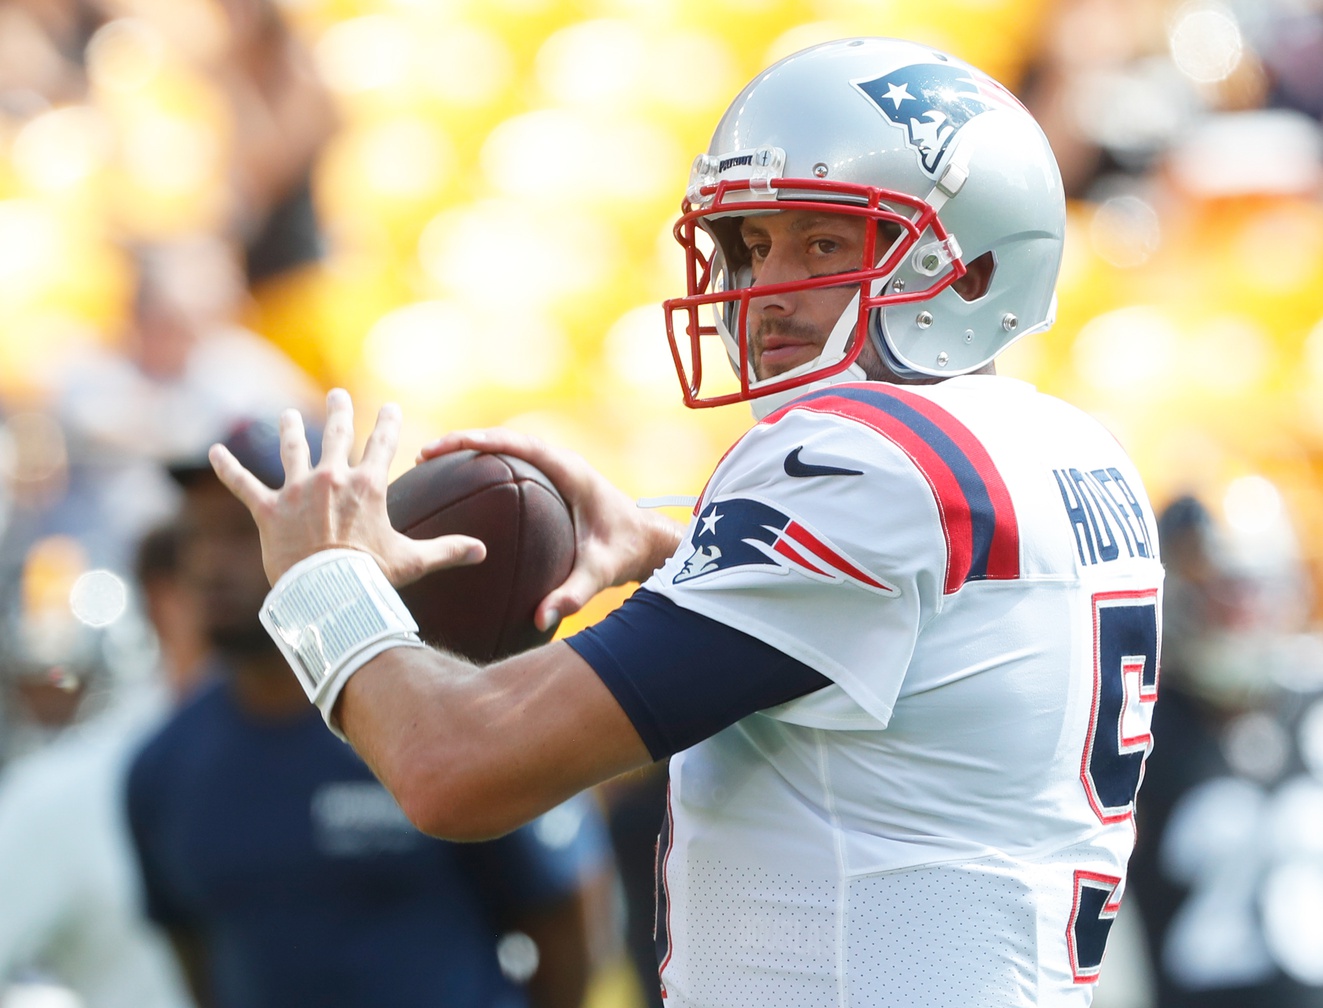 Sep 18, 2022; Pittsburgh, Pennsylvania, USA; New England Patriots quarterback Brian Hoyer (5) warms up before the game against the Pittsburgh Steelers at Acrisure Stadium. Credit: Charles LeClaire-USA TODAY Sports